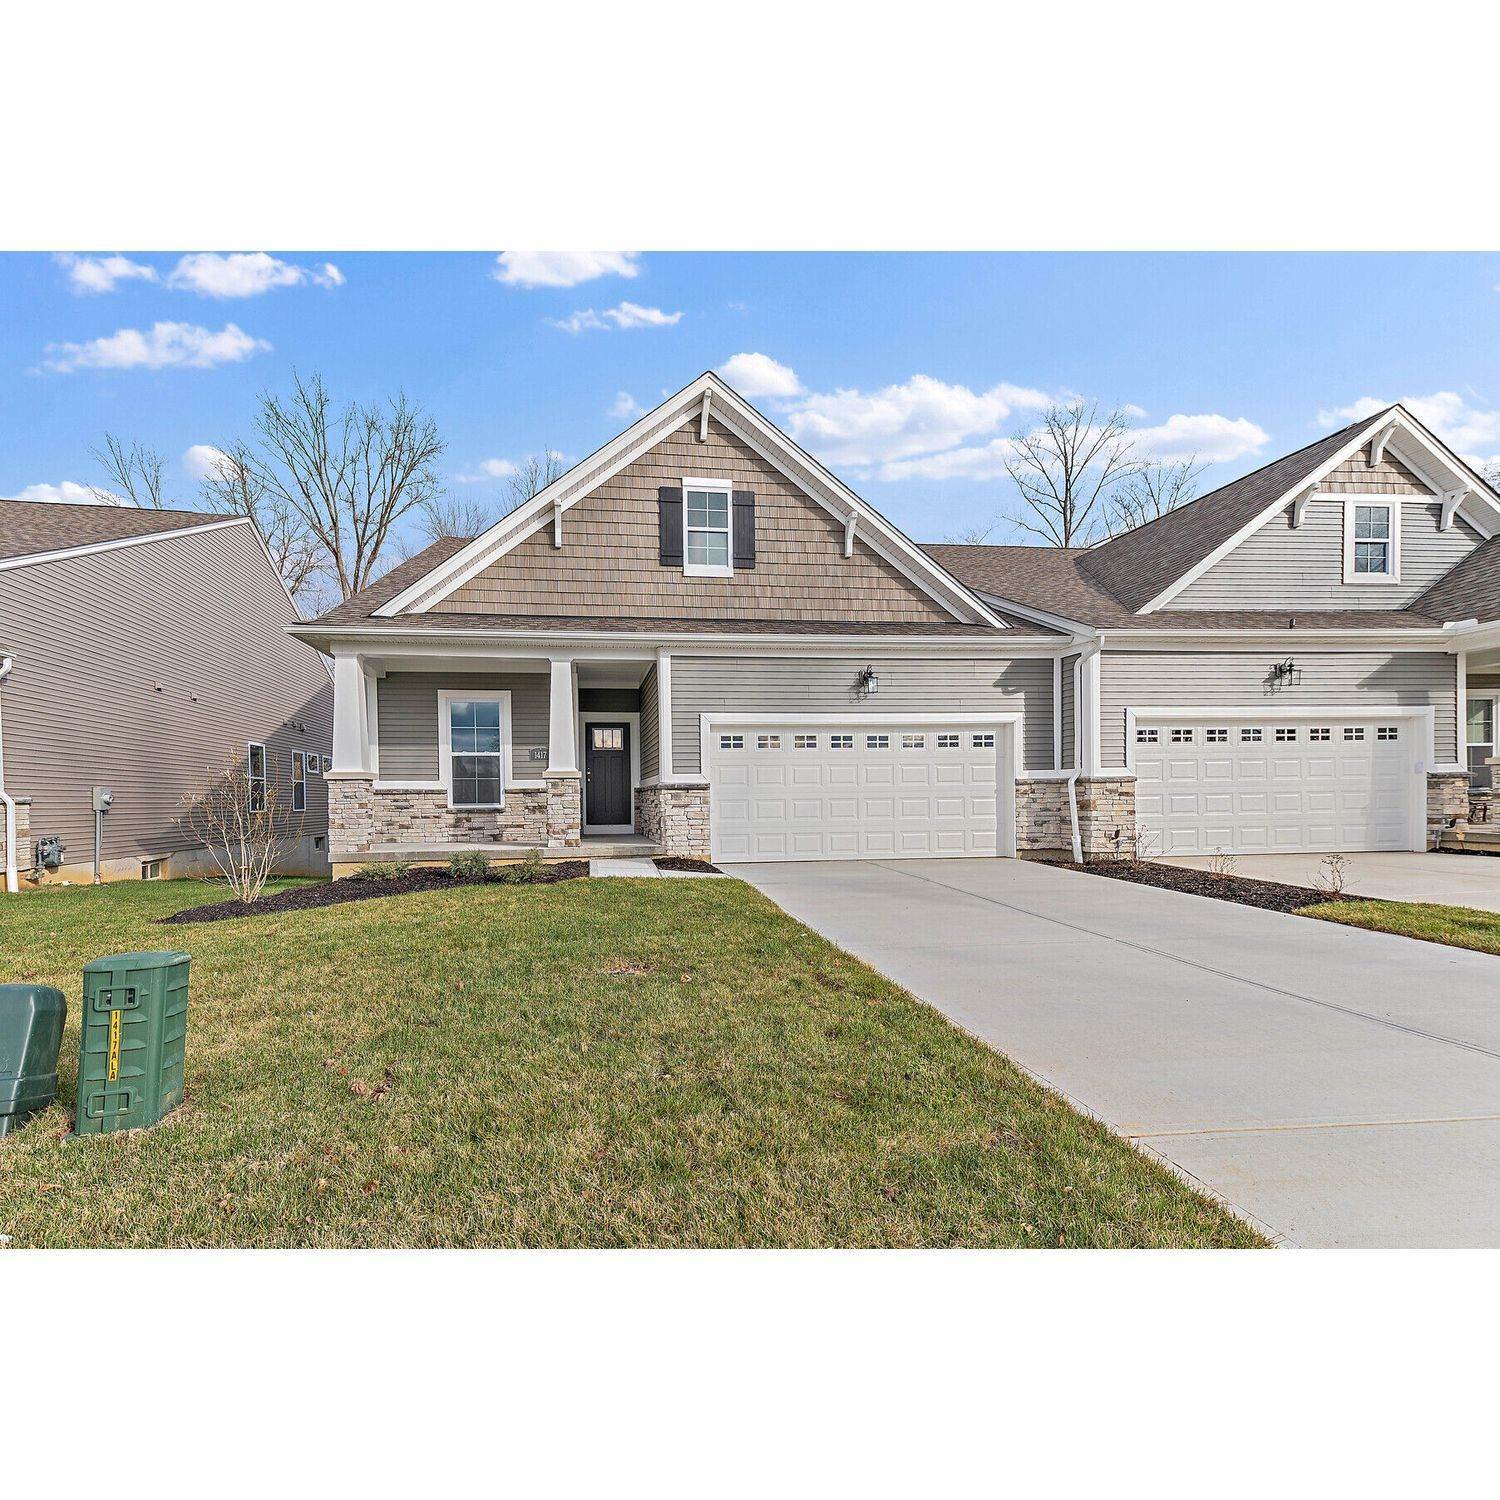 Single Family for Sale at Batavia, OH 45103